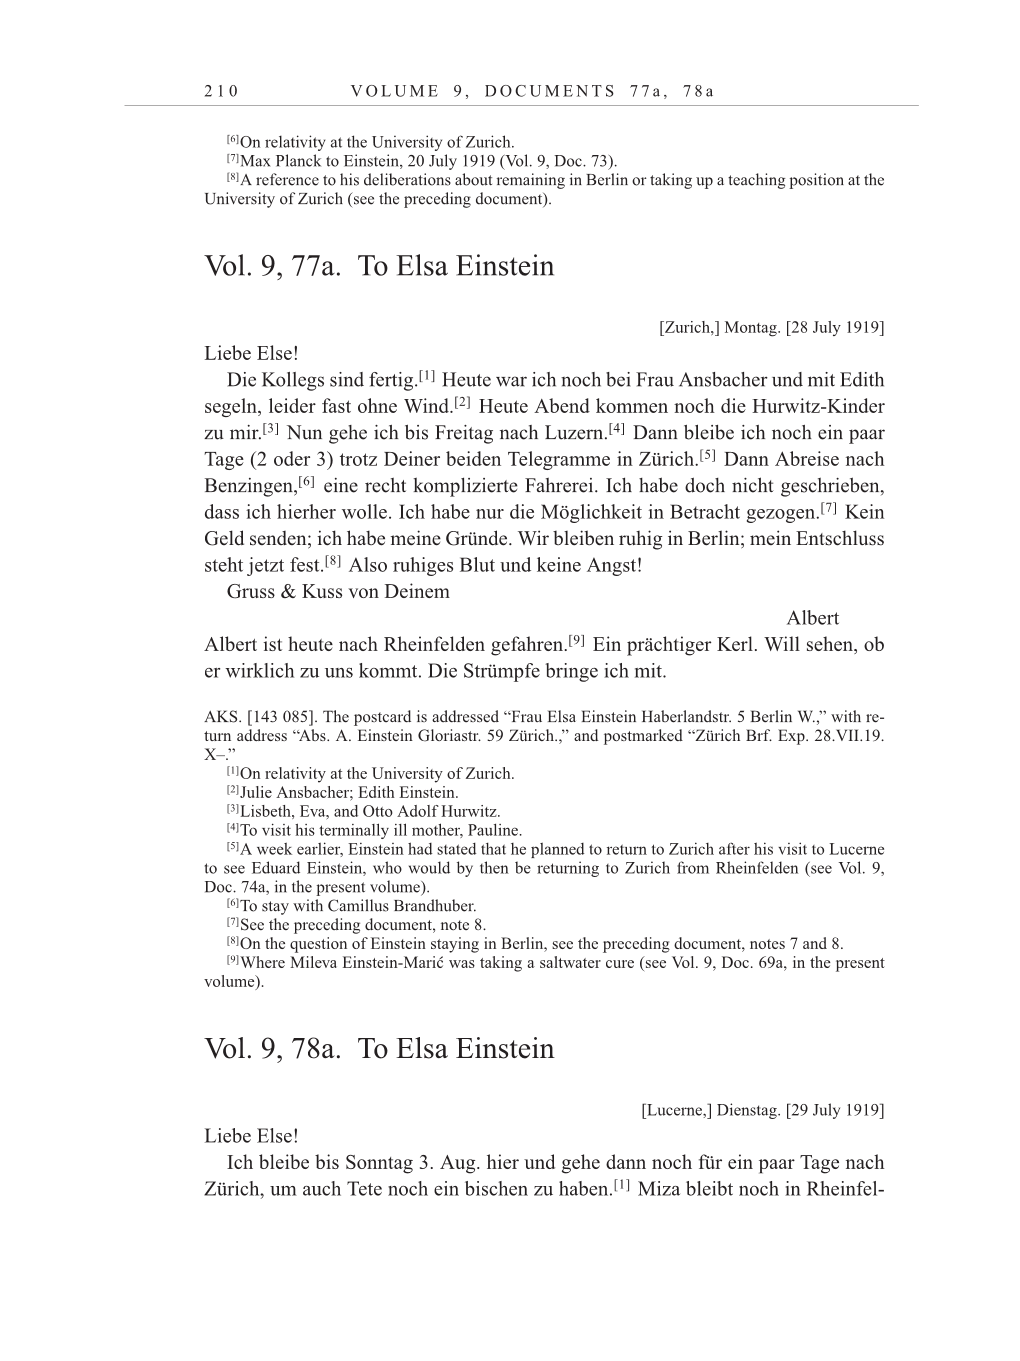 Volume 10: The Berlin Years: Correspondence May-December 1920 / Supplementary Correspondence 1909-1920 page 210